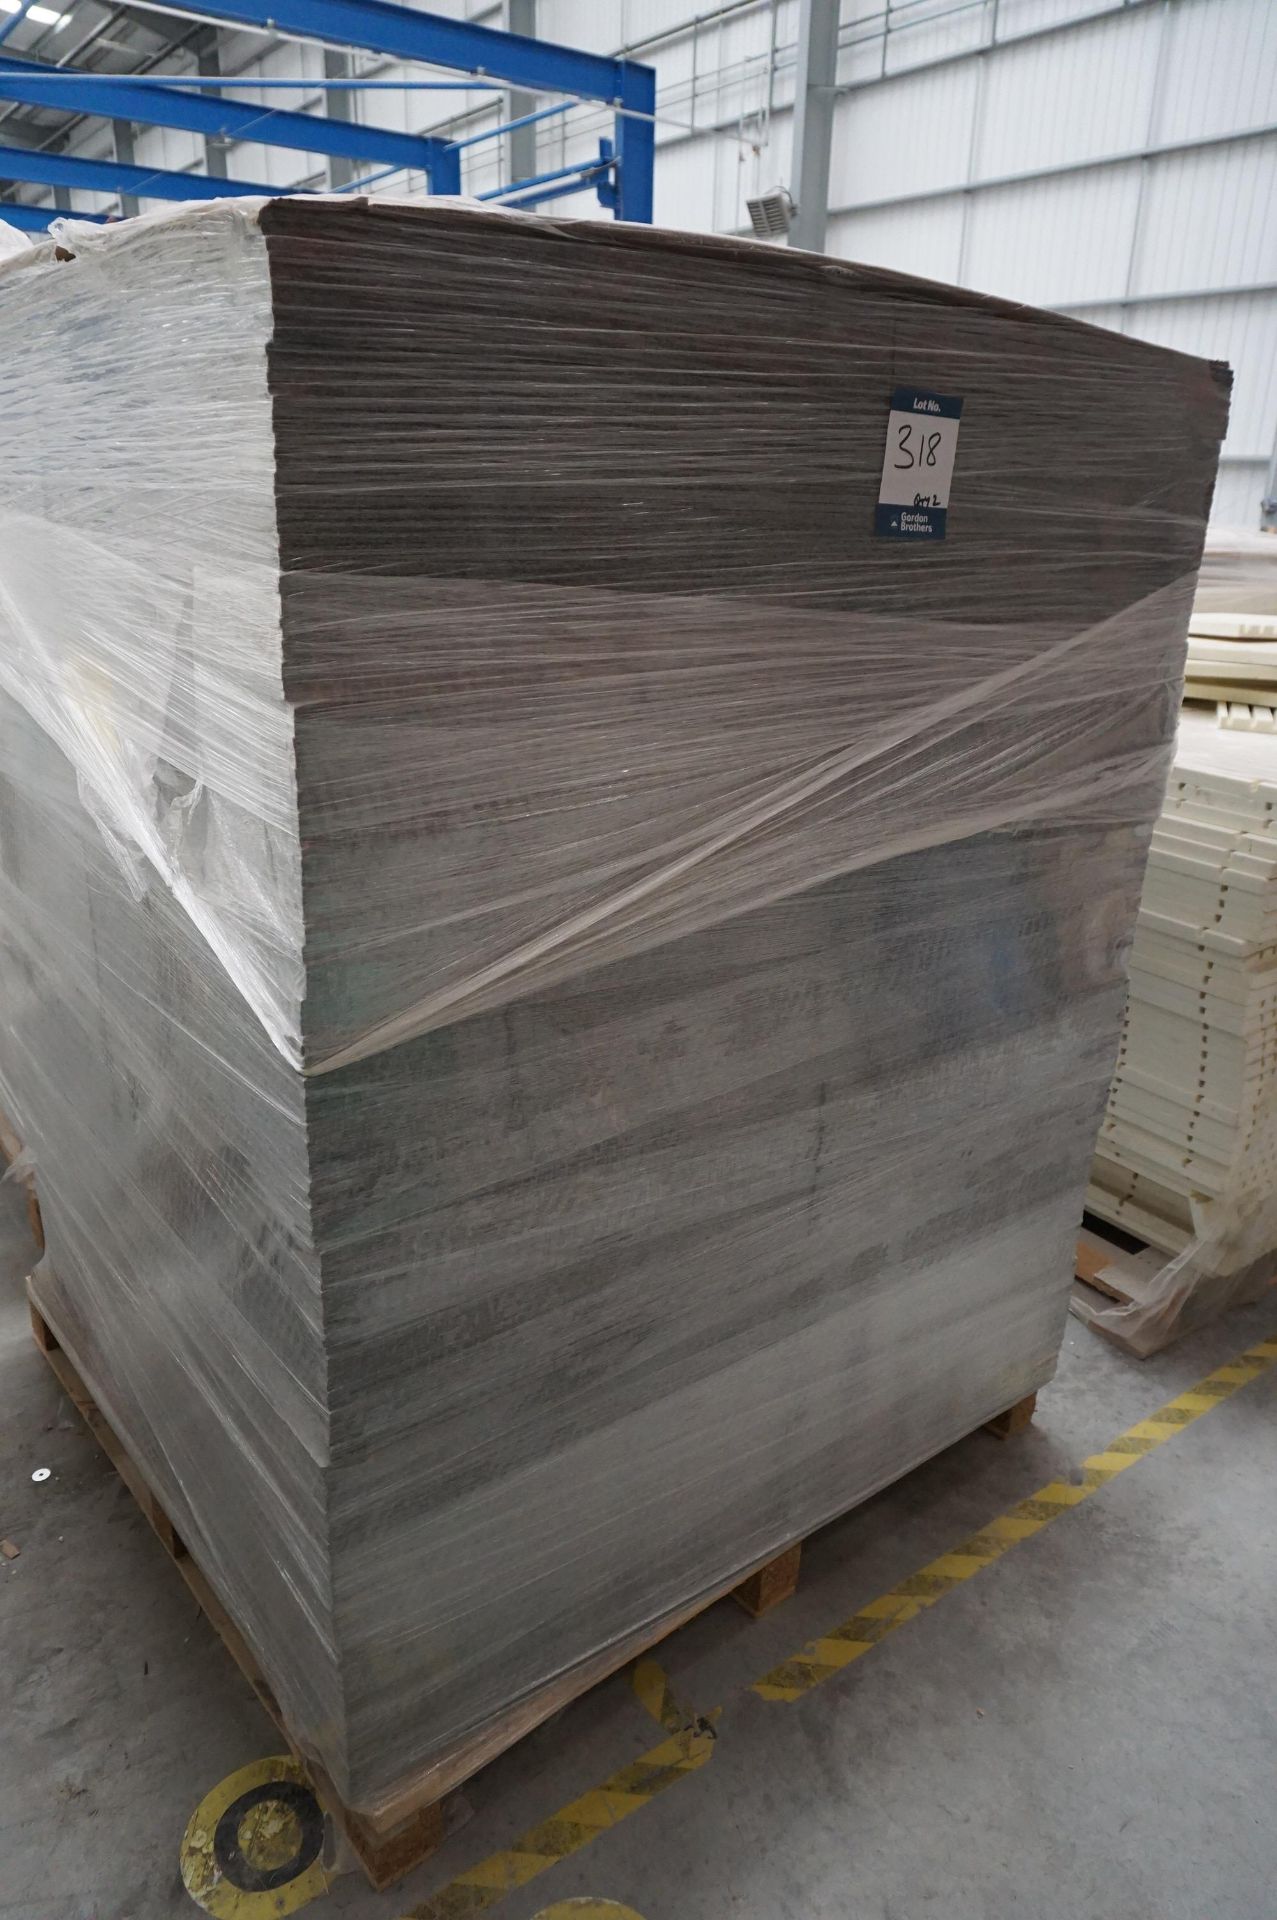 Quiet, Step T4 floor insulation on two pallets, approx. 700 sheets, 1190 x 593mm - Image 8 of 12